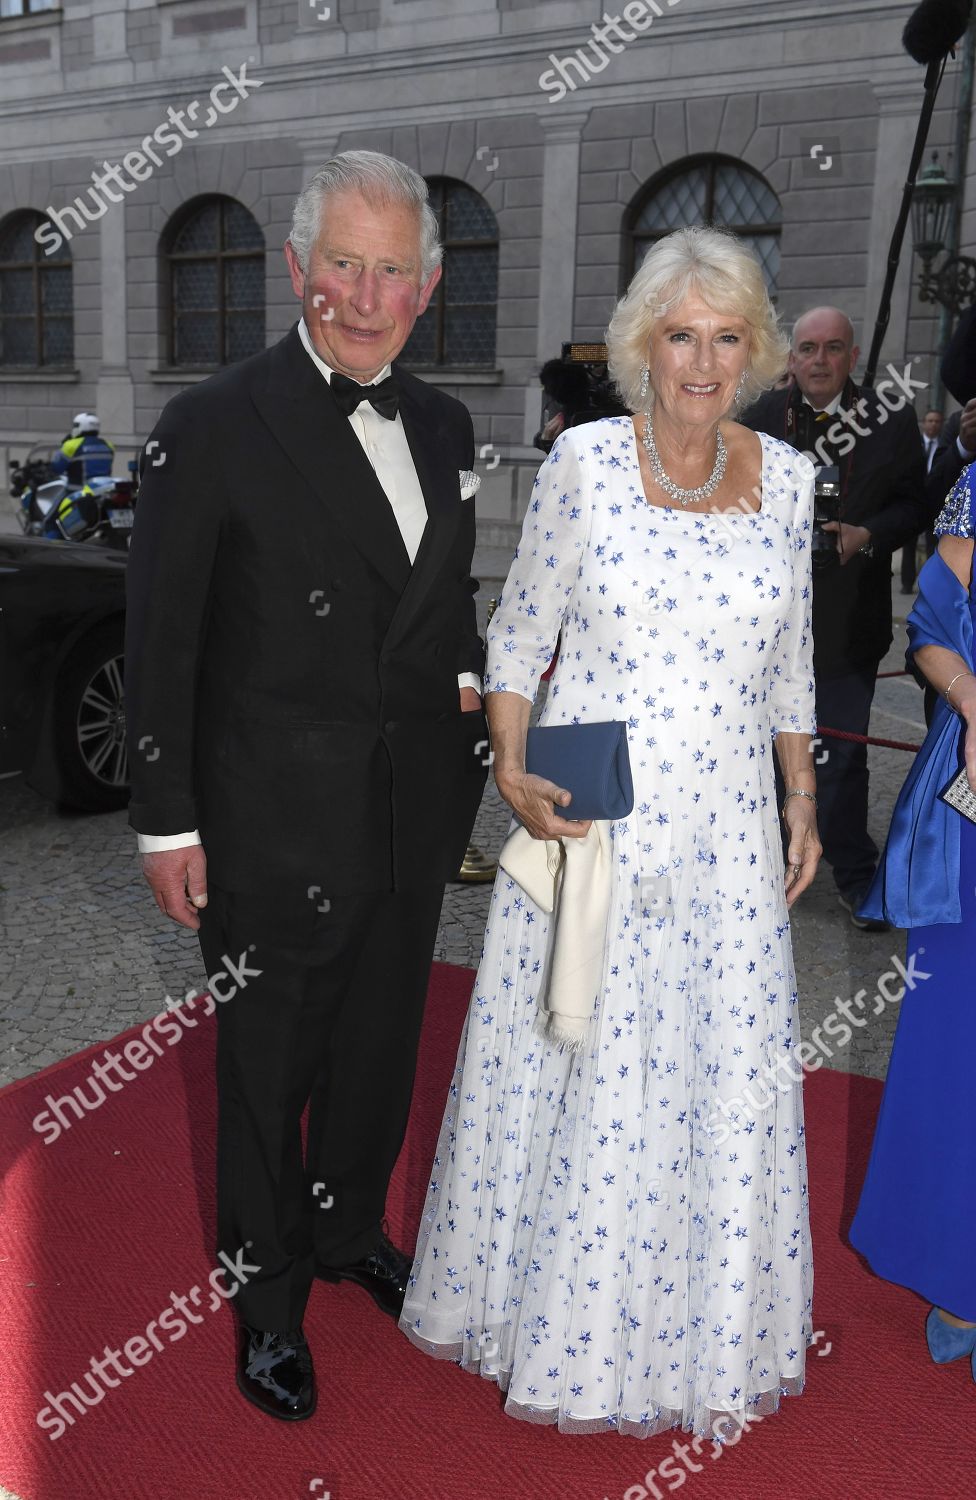 prince-charles-and-camilla-duchess-of-cornwall-visit-to-germany-shutterstock-editorial-10233474b.jpg